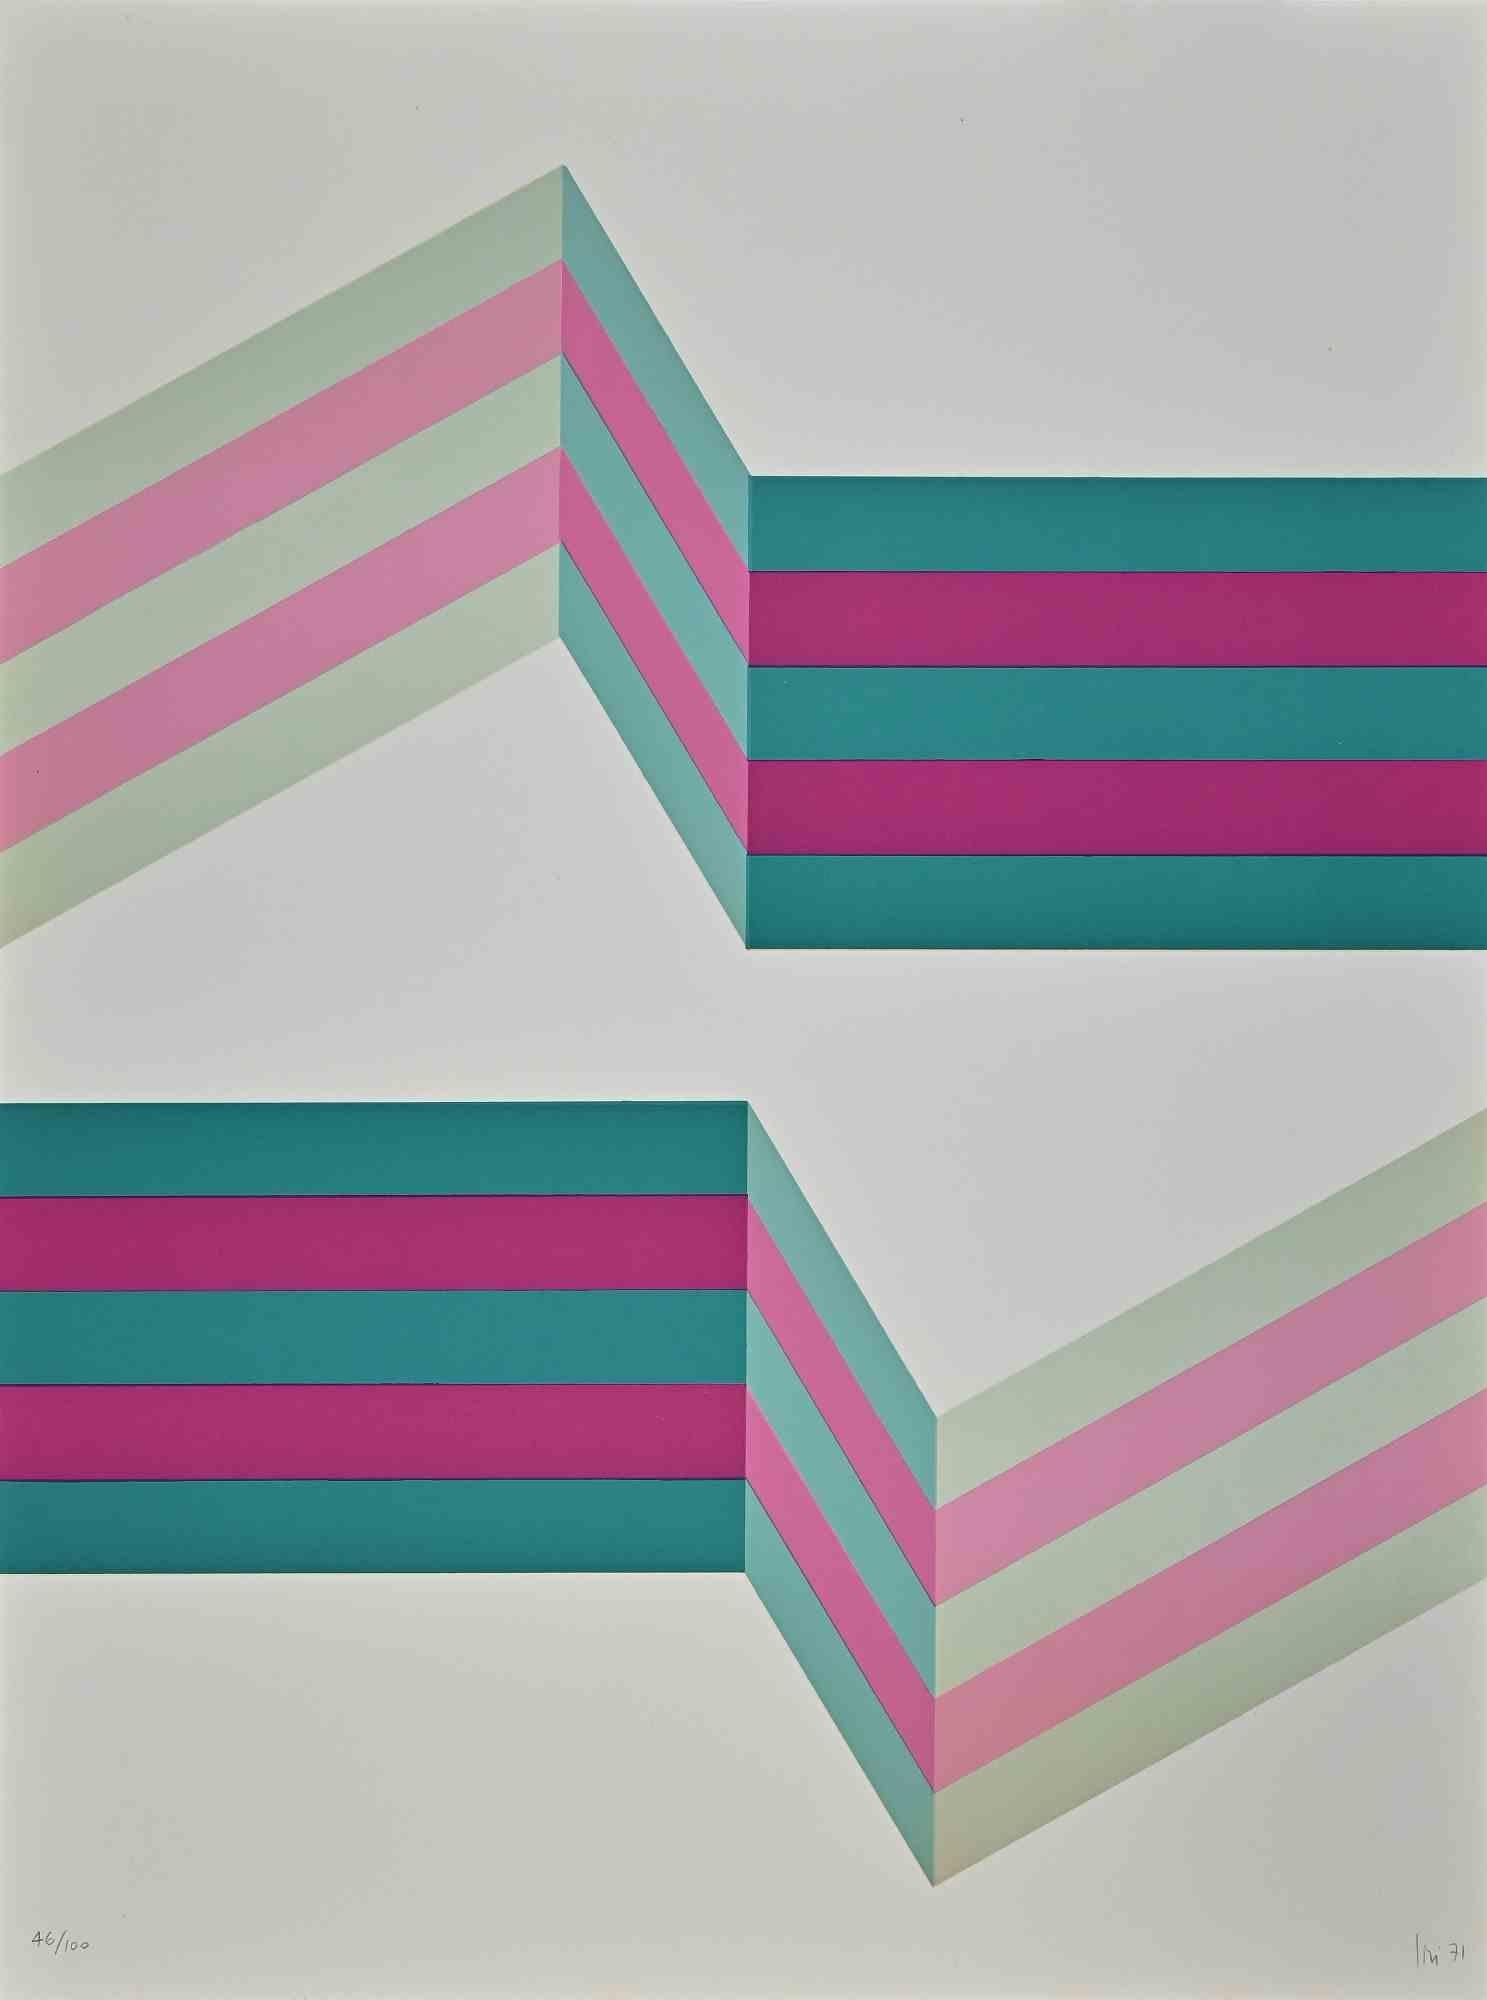 Abstract Composition is a lithograph realized by Renato Livi in 1971.

Hand-signed and dated on the lower right margin.

Numbered on the lower left margin. Edition of 100 prints

Good conditions.

Abstract composition on the tones of green and pink,